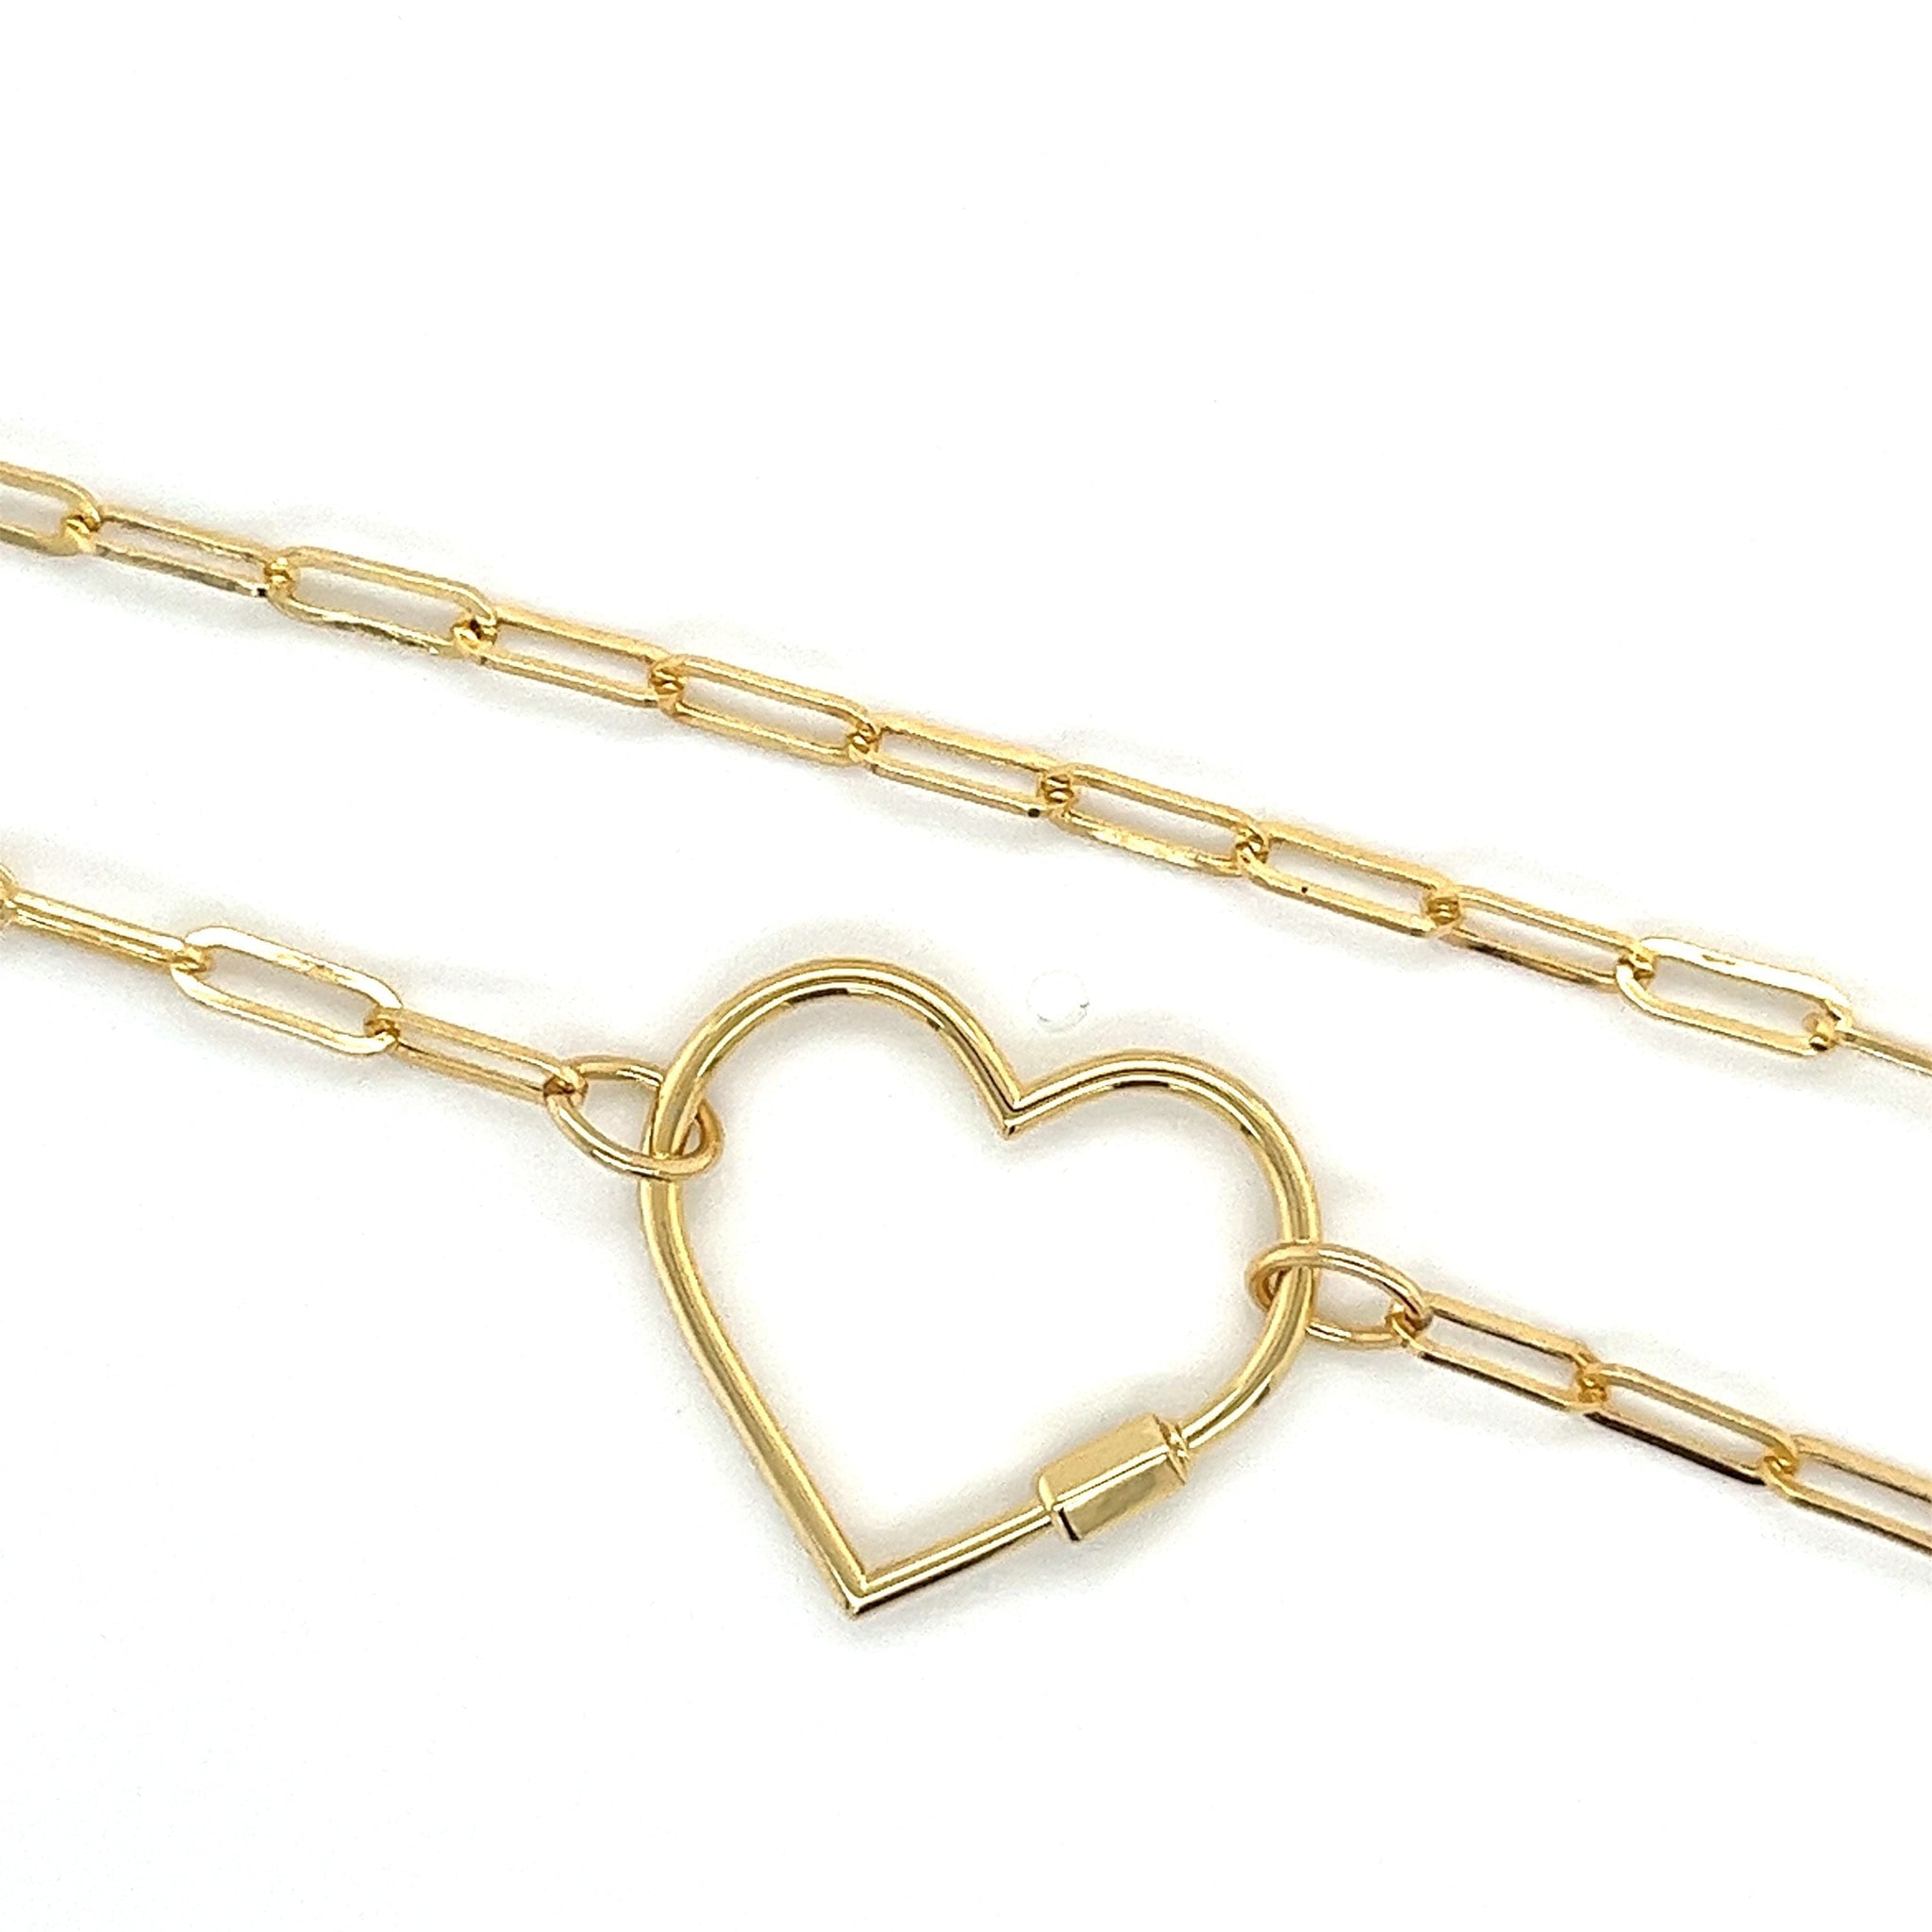 Paper Clip bracelet with heart charm – Legaacy